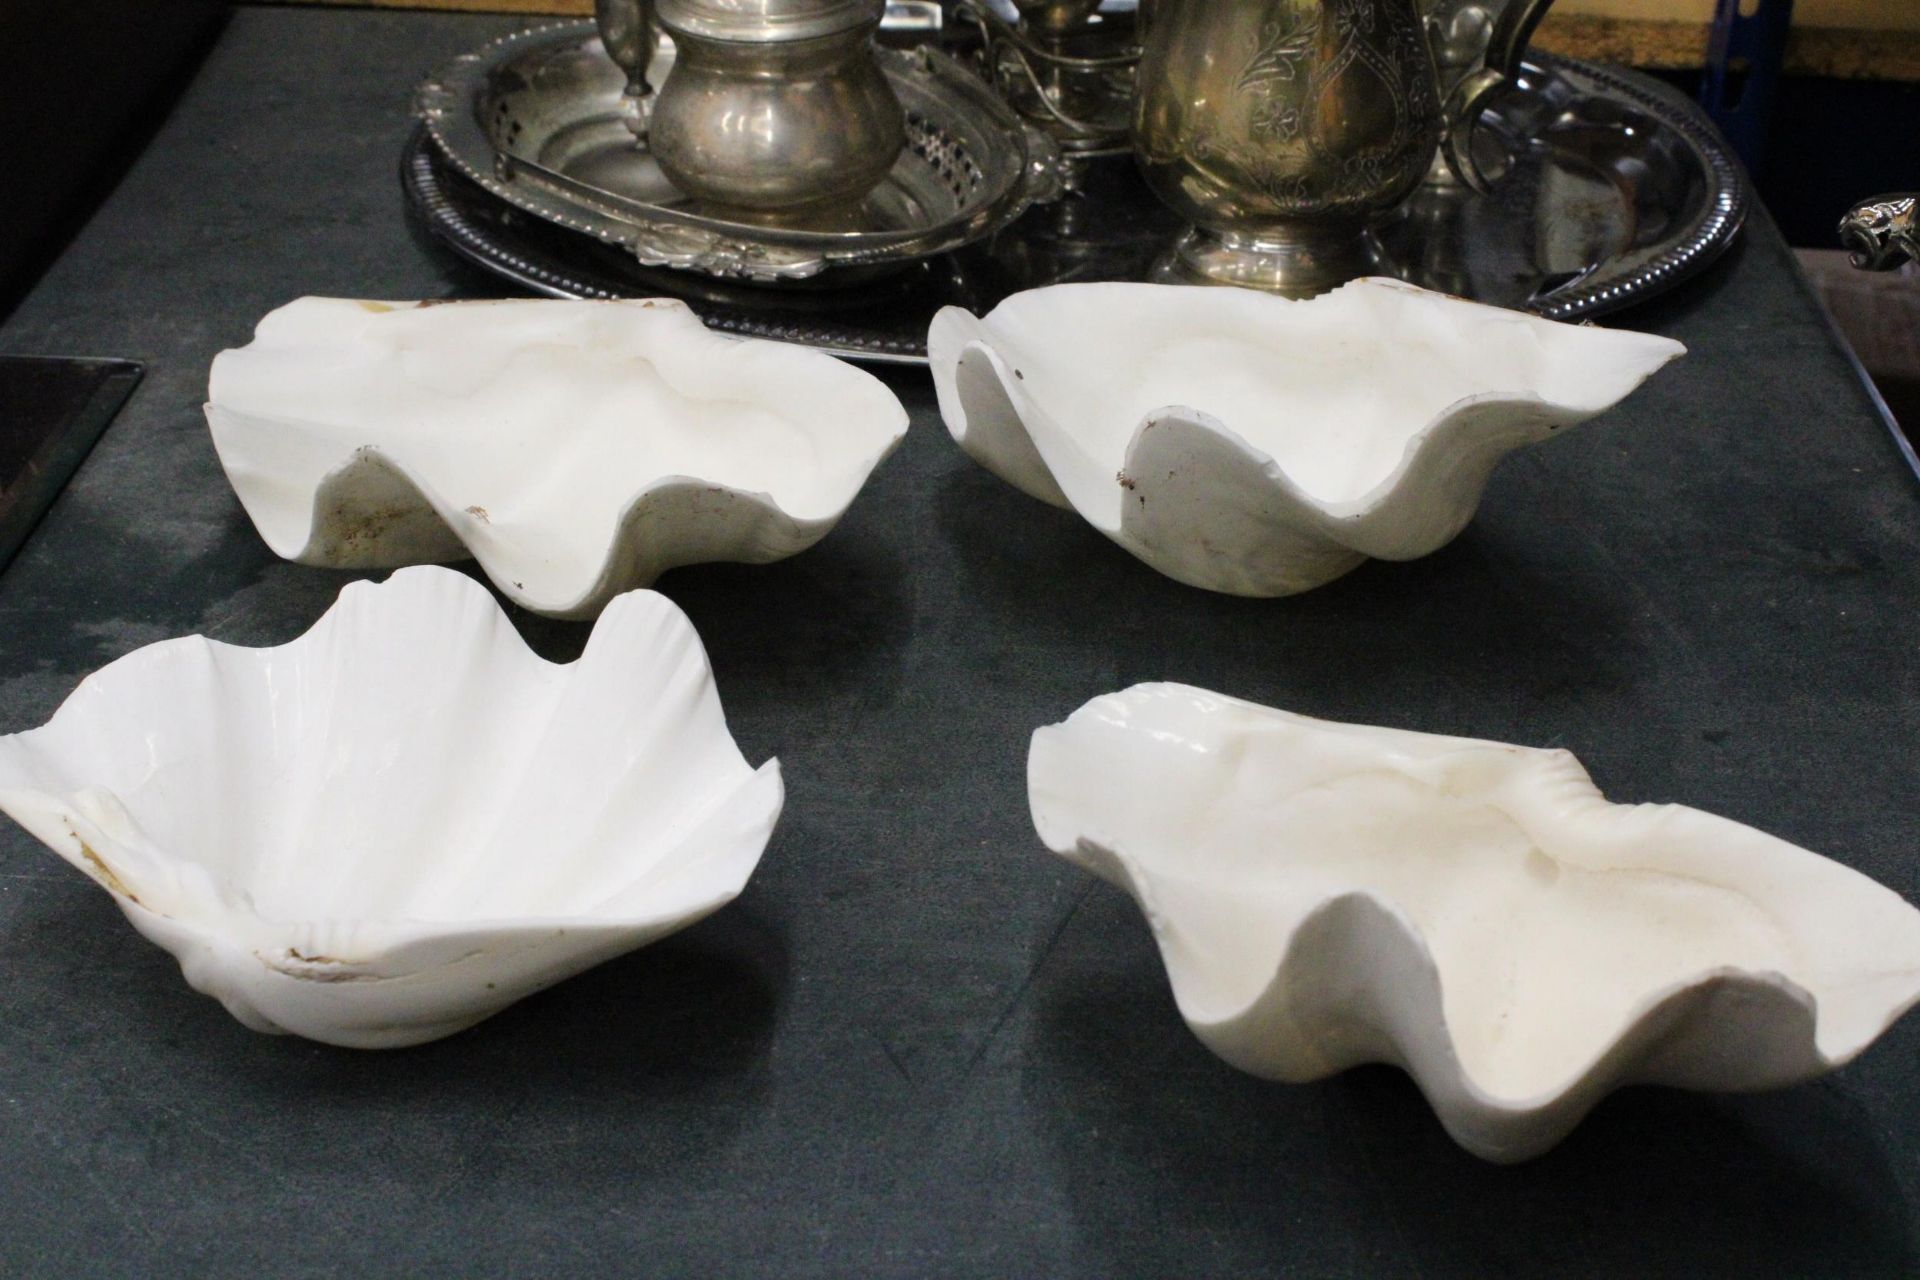 FOUR CERAMIC CLAM SHELL DISHES - Image 5 of 5